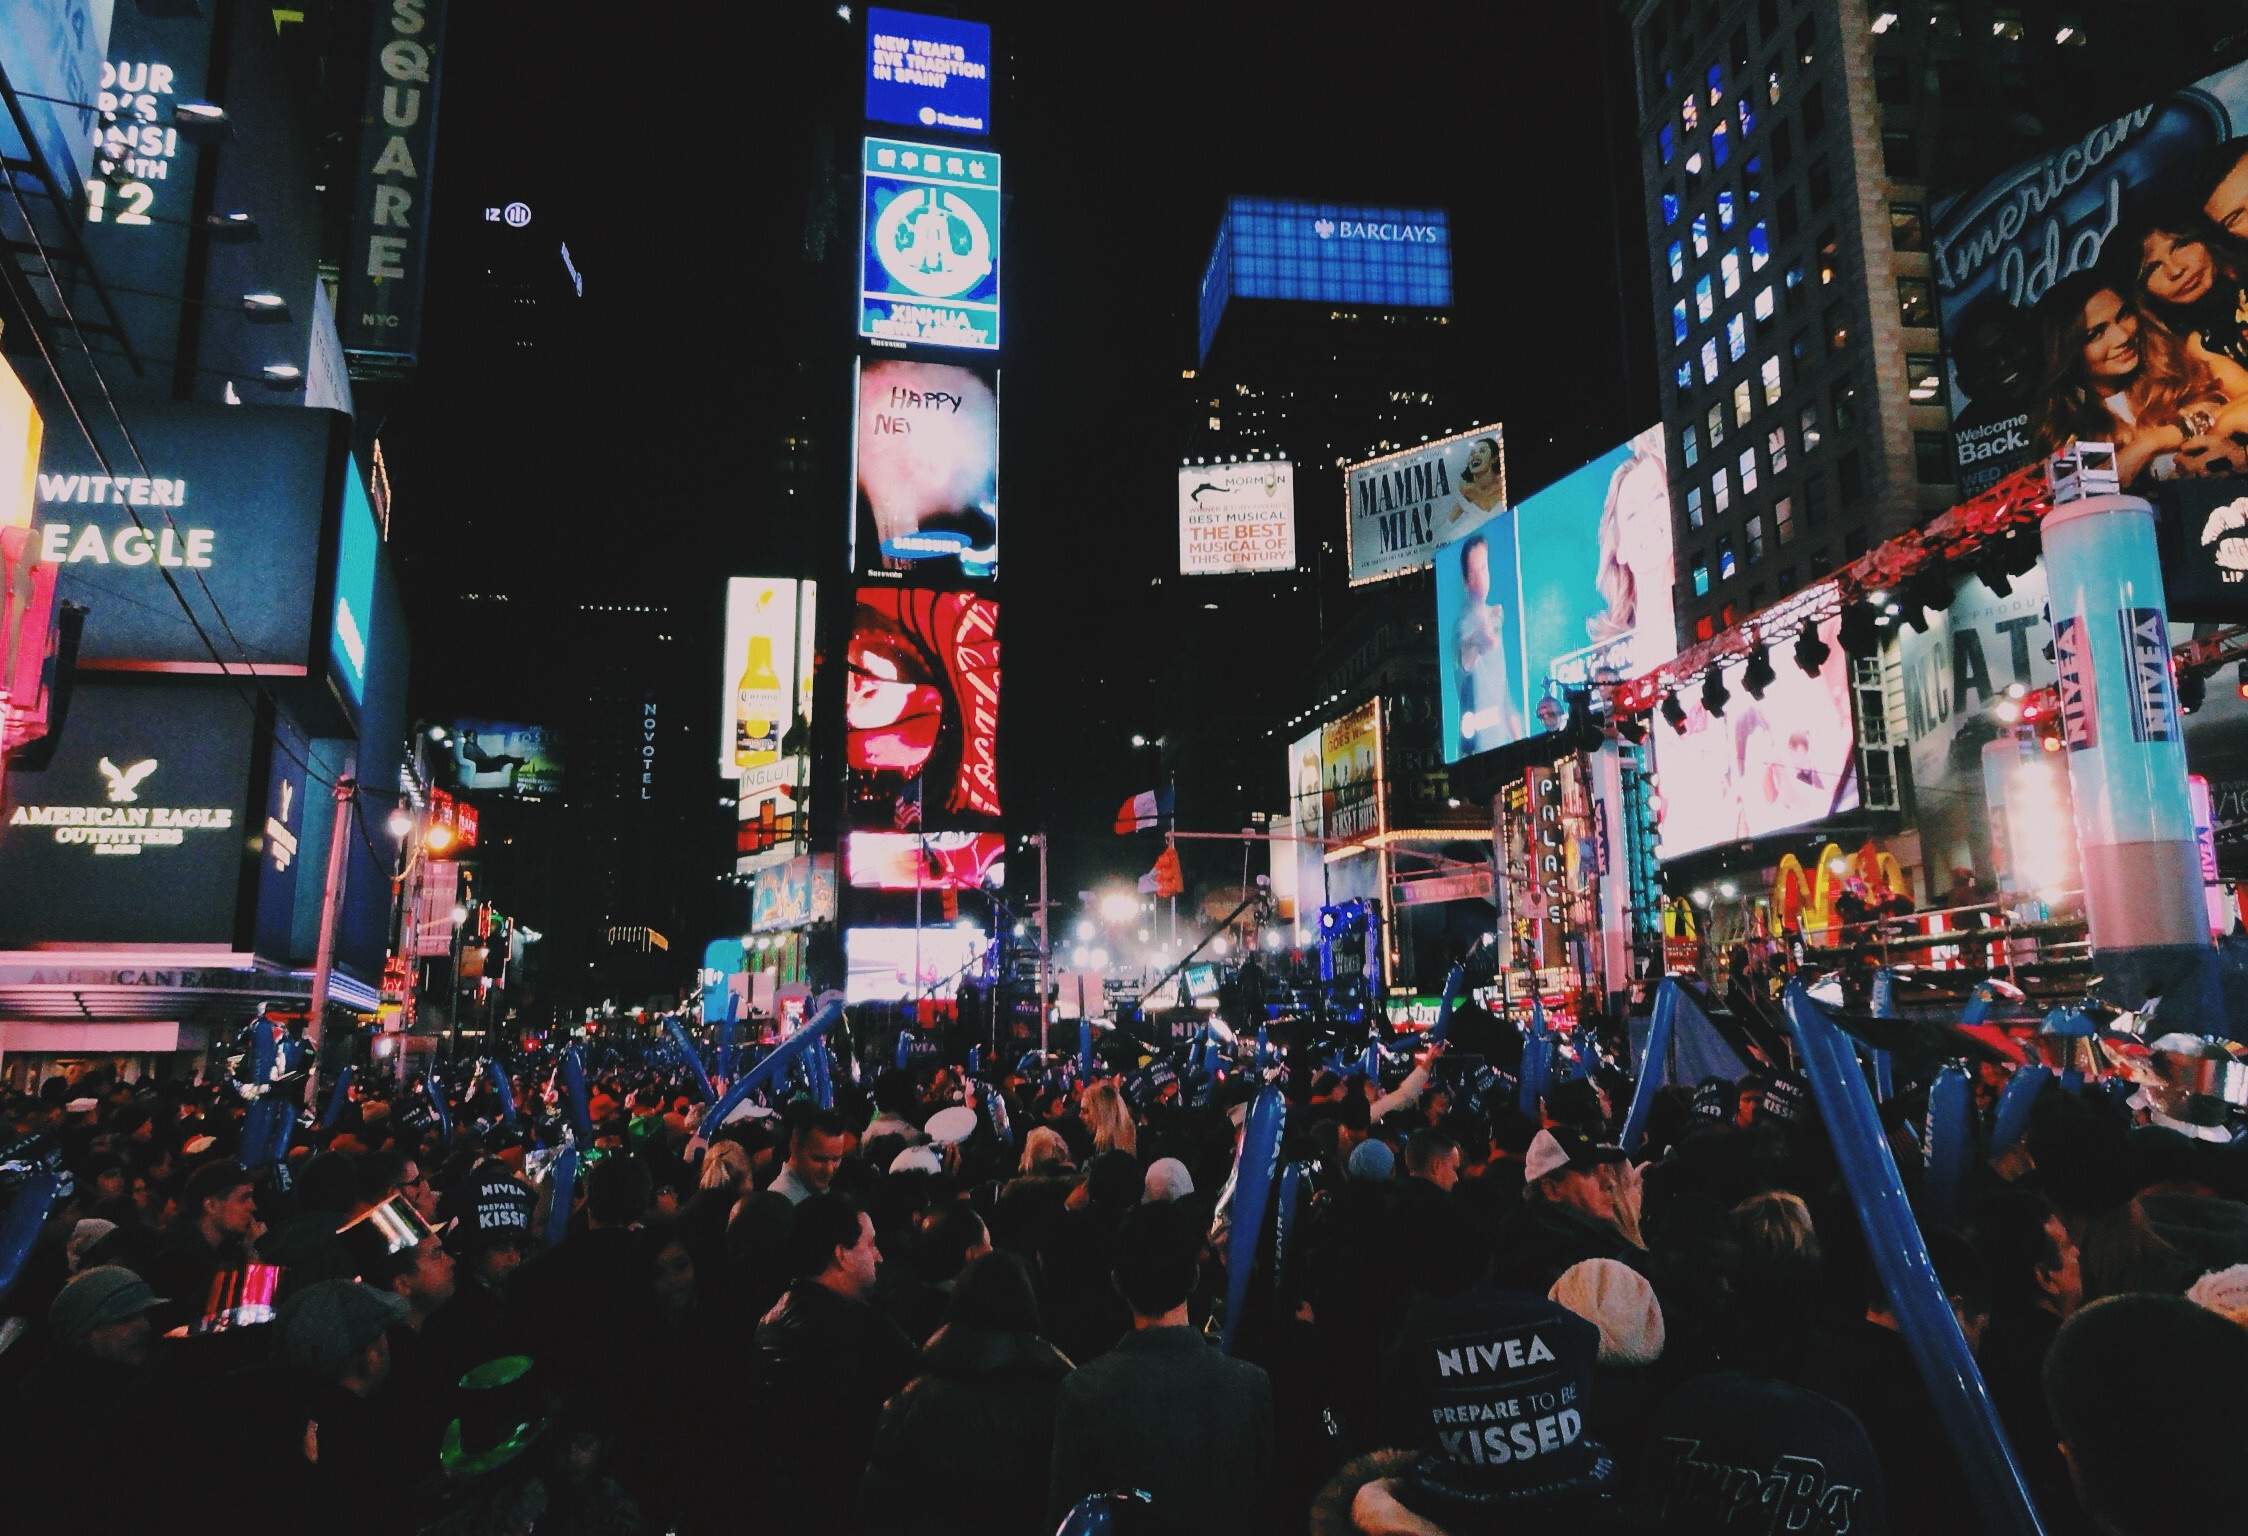 A night-time view of a crowded Times Square surrounded by buildings with bright billboards.